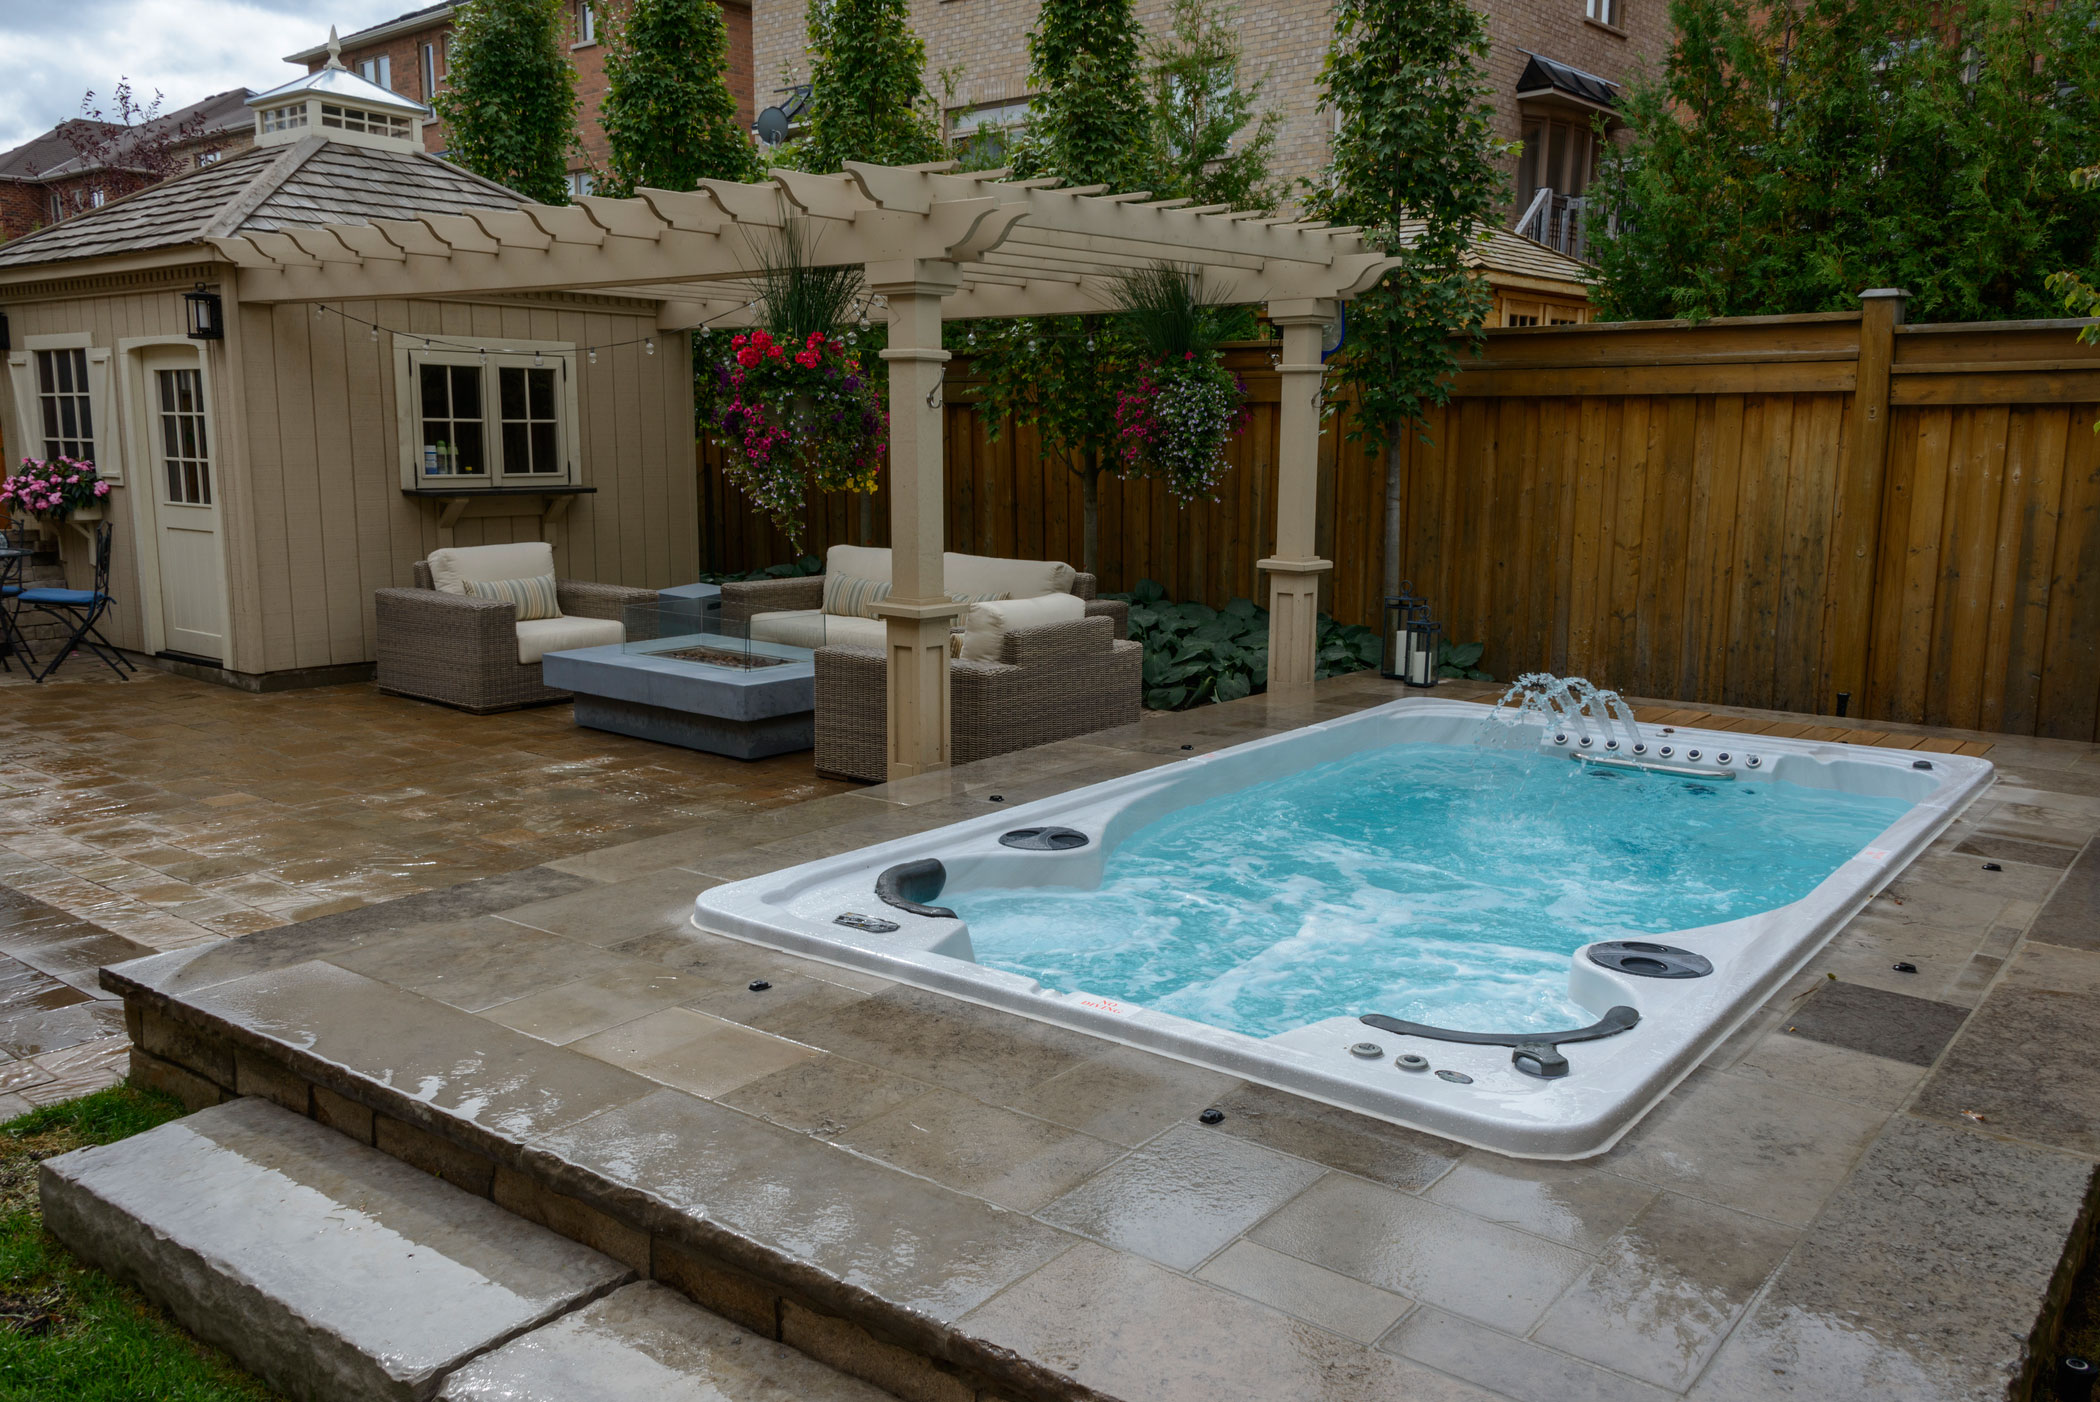 Company insurance is intended to safeguard the financial assets of a business owner and is a vital investment for a hot tub garden.